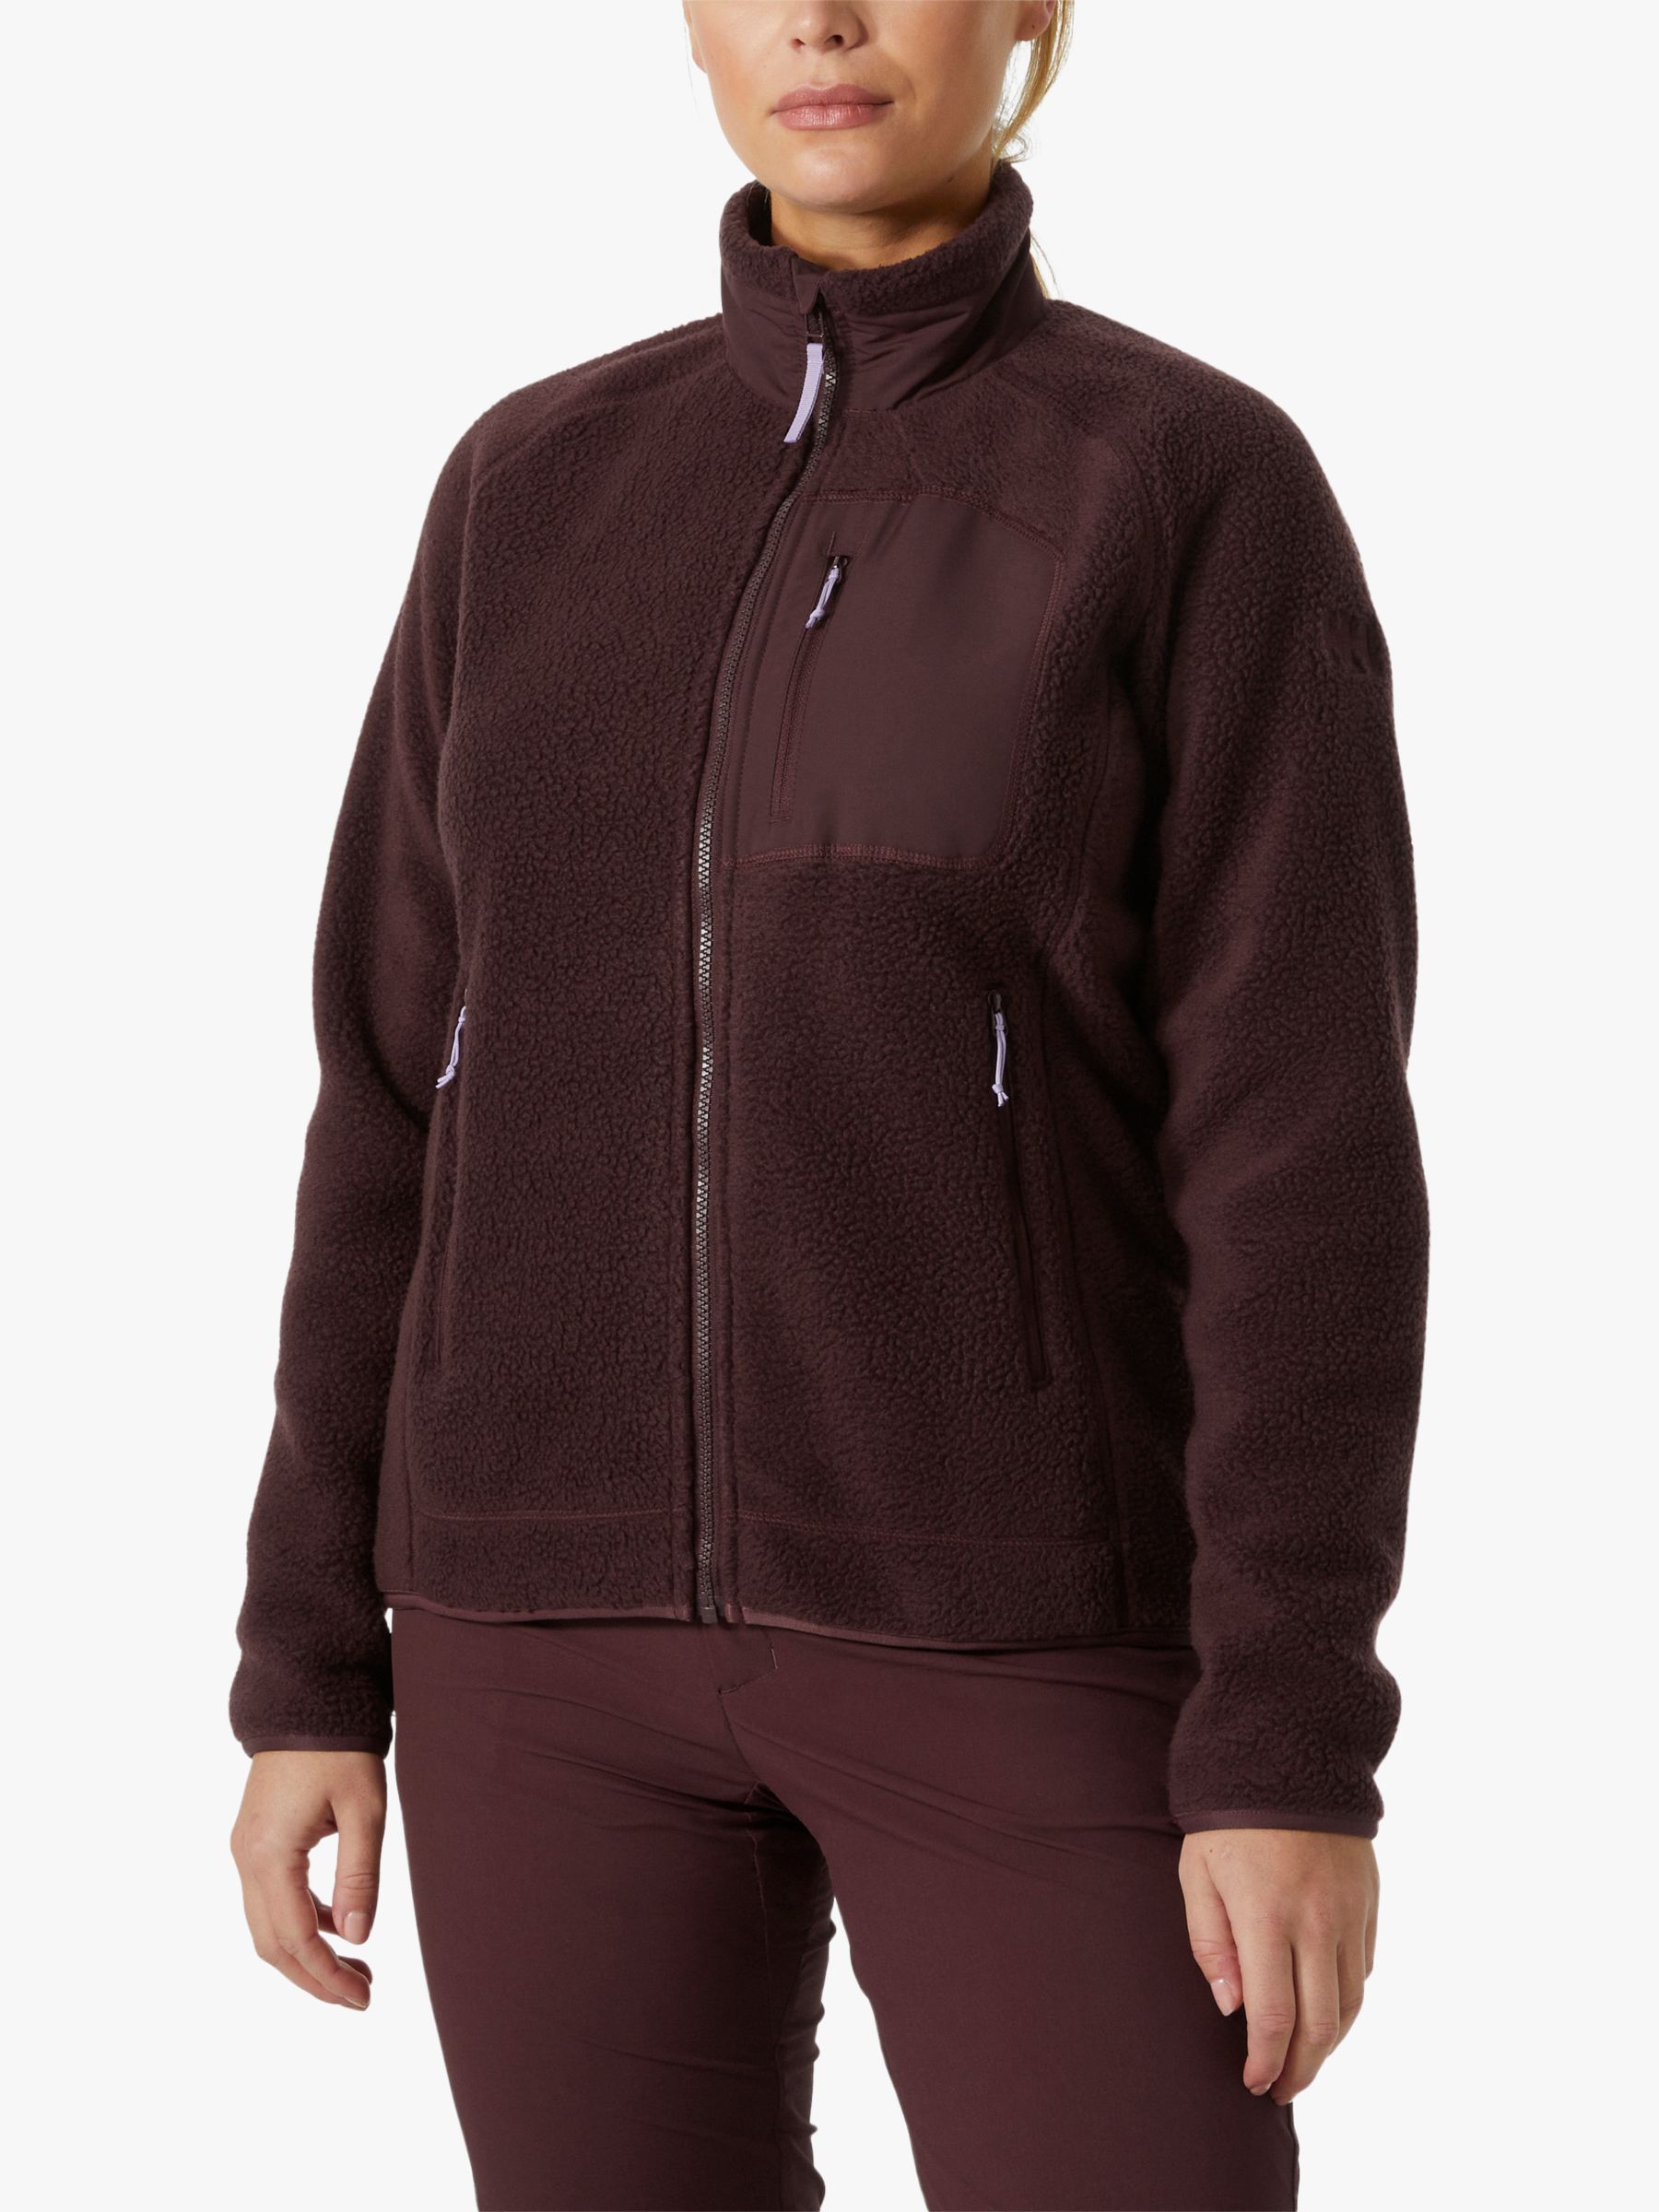 Helly Hansen Imperial Pile Fleece Jacket, Hickory at John Lewis & Partners